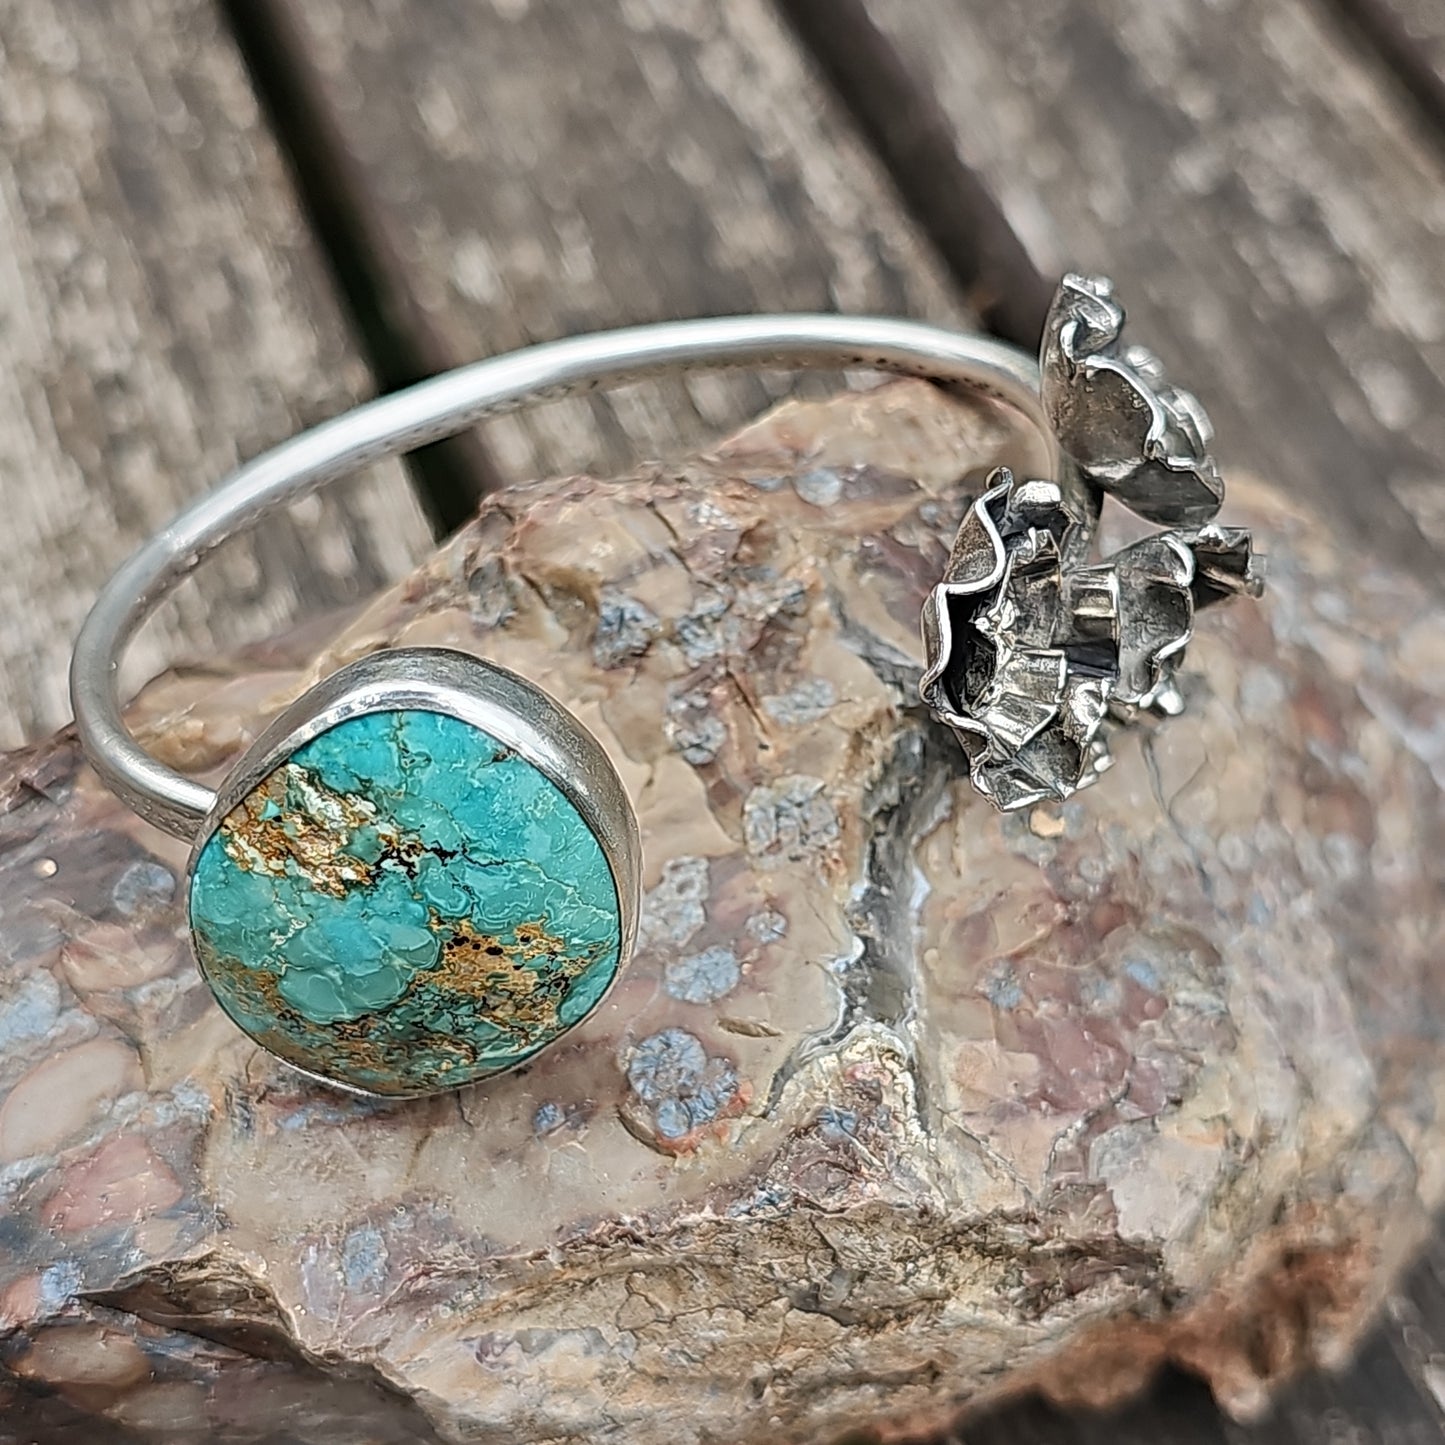 XX//CORSAGE Bracelet - Turquoise Bonanza and All Sterling Silver size M/L